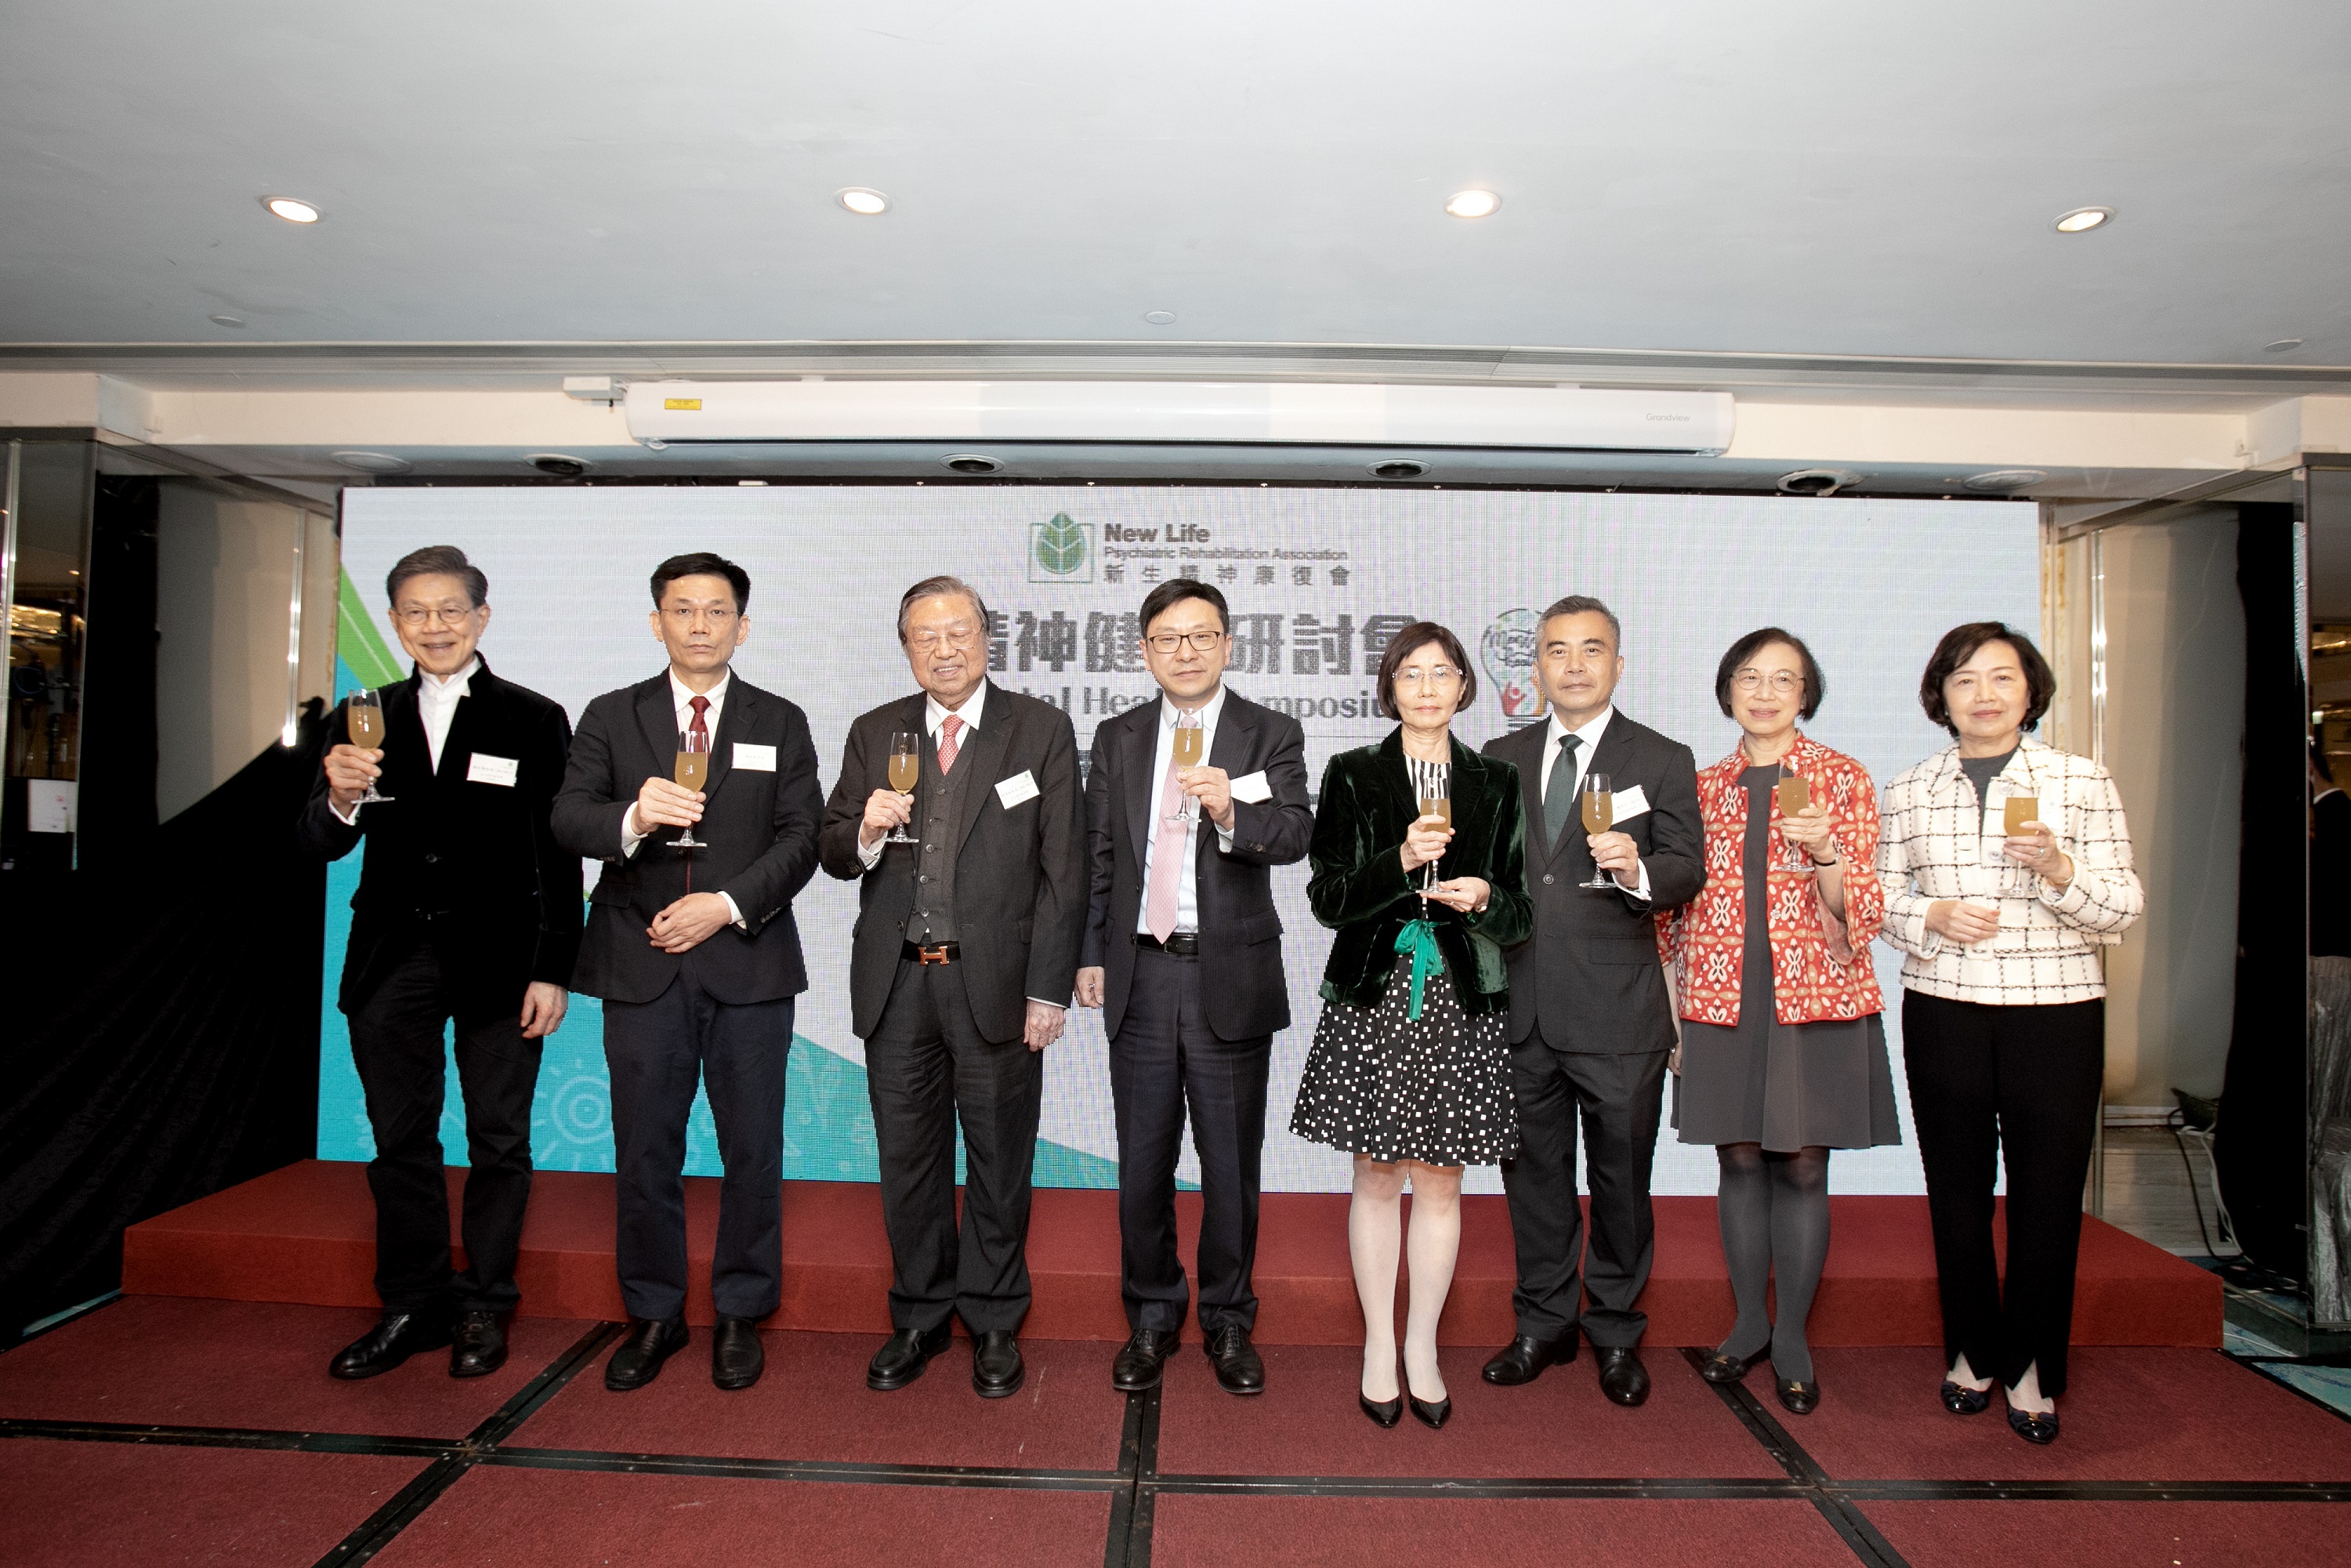 At the annual dinner of New Life Psychiatric Rehabilitation Association, all the guests of honor made a toast together: (From the left) Vice-President of NLPRA, Prof. YEOH Eng-kiong, GBS, OBE, JP; Deputy Director-General of the Department of Social Work, of the Liaison Office of the Central People's Government in the HKSAR Mr. ZHOU He; the Secretary for Labour and Welfare, Mr. Chris SUN Yuk-han, JP; Patron of NLPRA, Mr. HO Sai-chu, GBM, GBS, JP; Chairperson of Executive Committee of NLPRA, Prof. Annie TAM Kam-lan, GBS, JP; the Chairman of the Advisory Committee on Mental Health, Mr WONG Yan-lung, GBM, SC; Professor, School of Nursing, The University of Hong Kong, Former Secretary for Food and Health, Prof. Sophia CHAN Siu-chee, GBS, JP; and Vice-President of NLPRA, Mrs. Susan So, SBS.